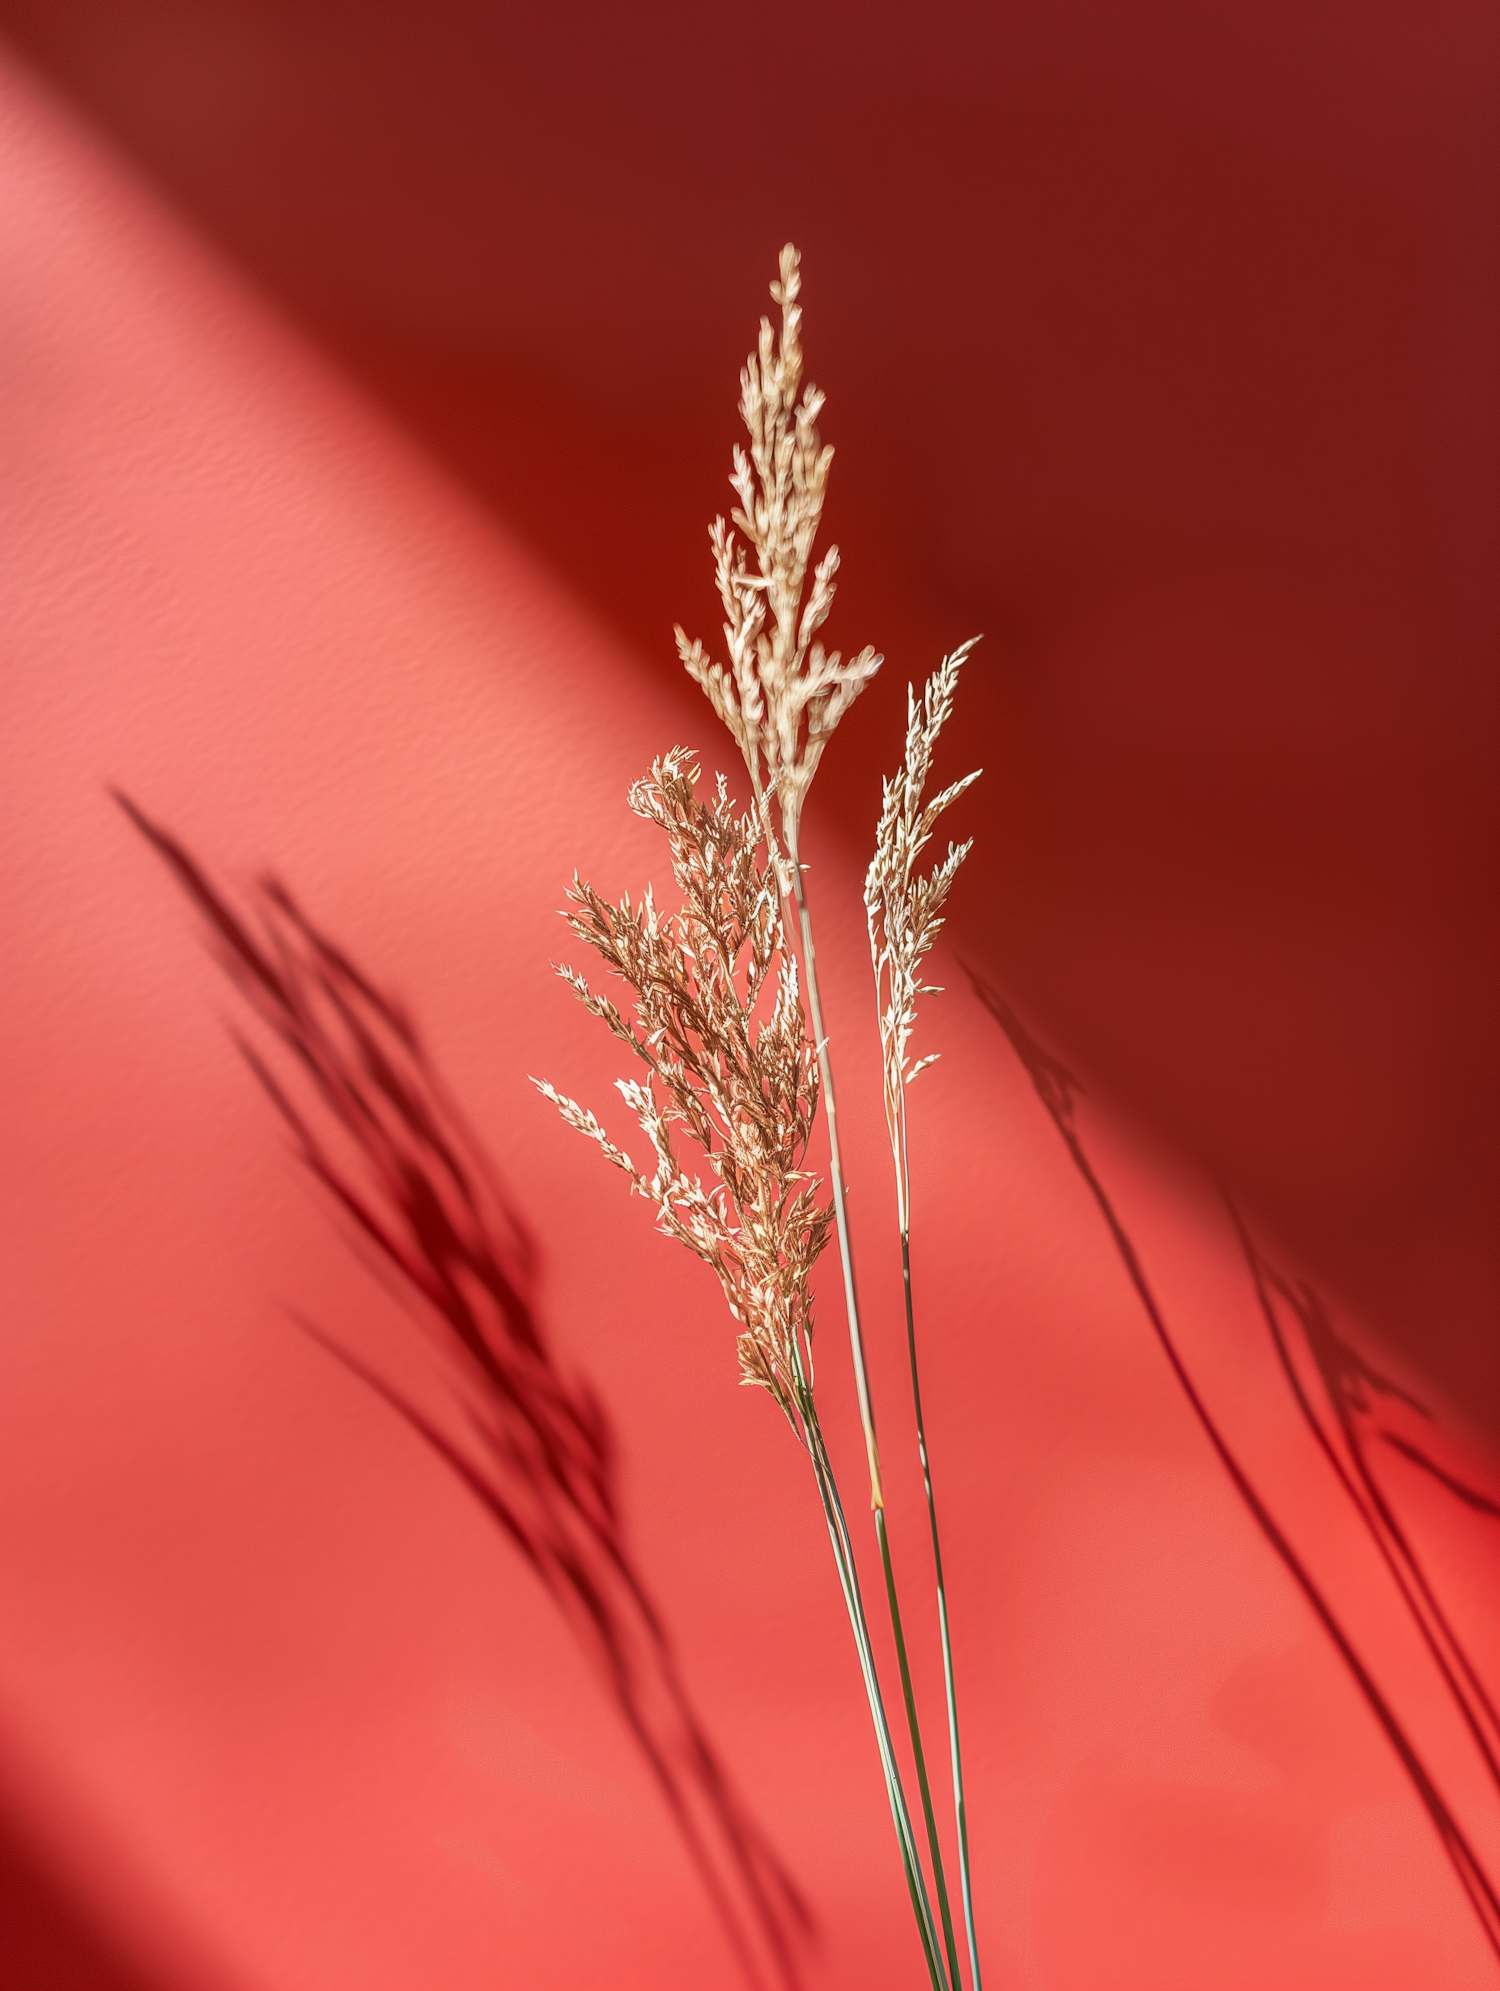 Dried Ornamental Grass Against Coral Red